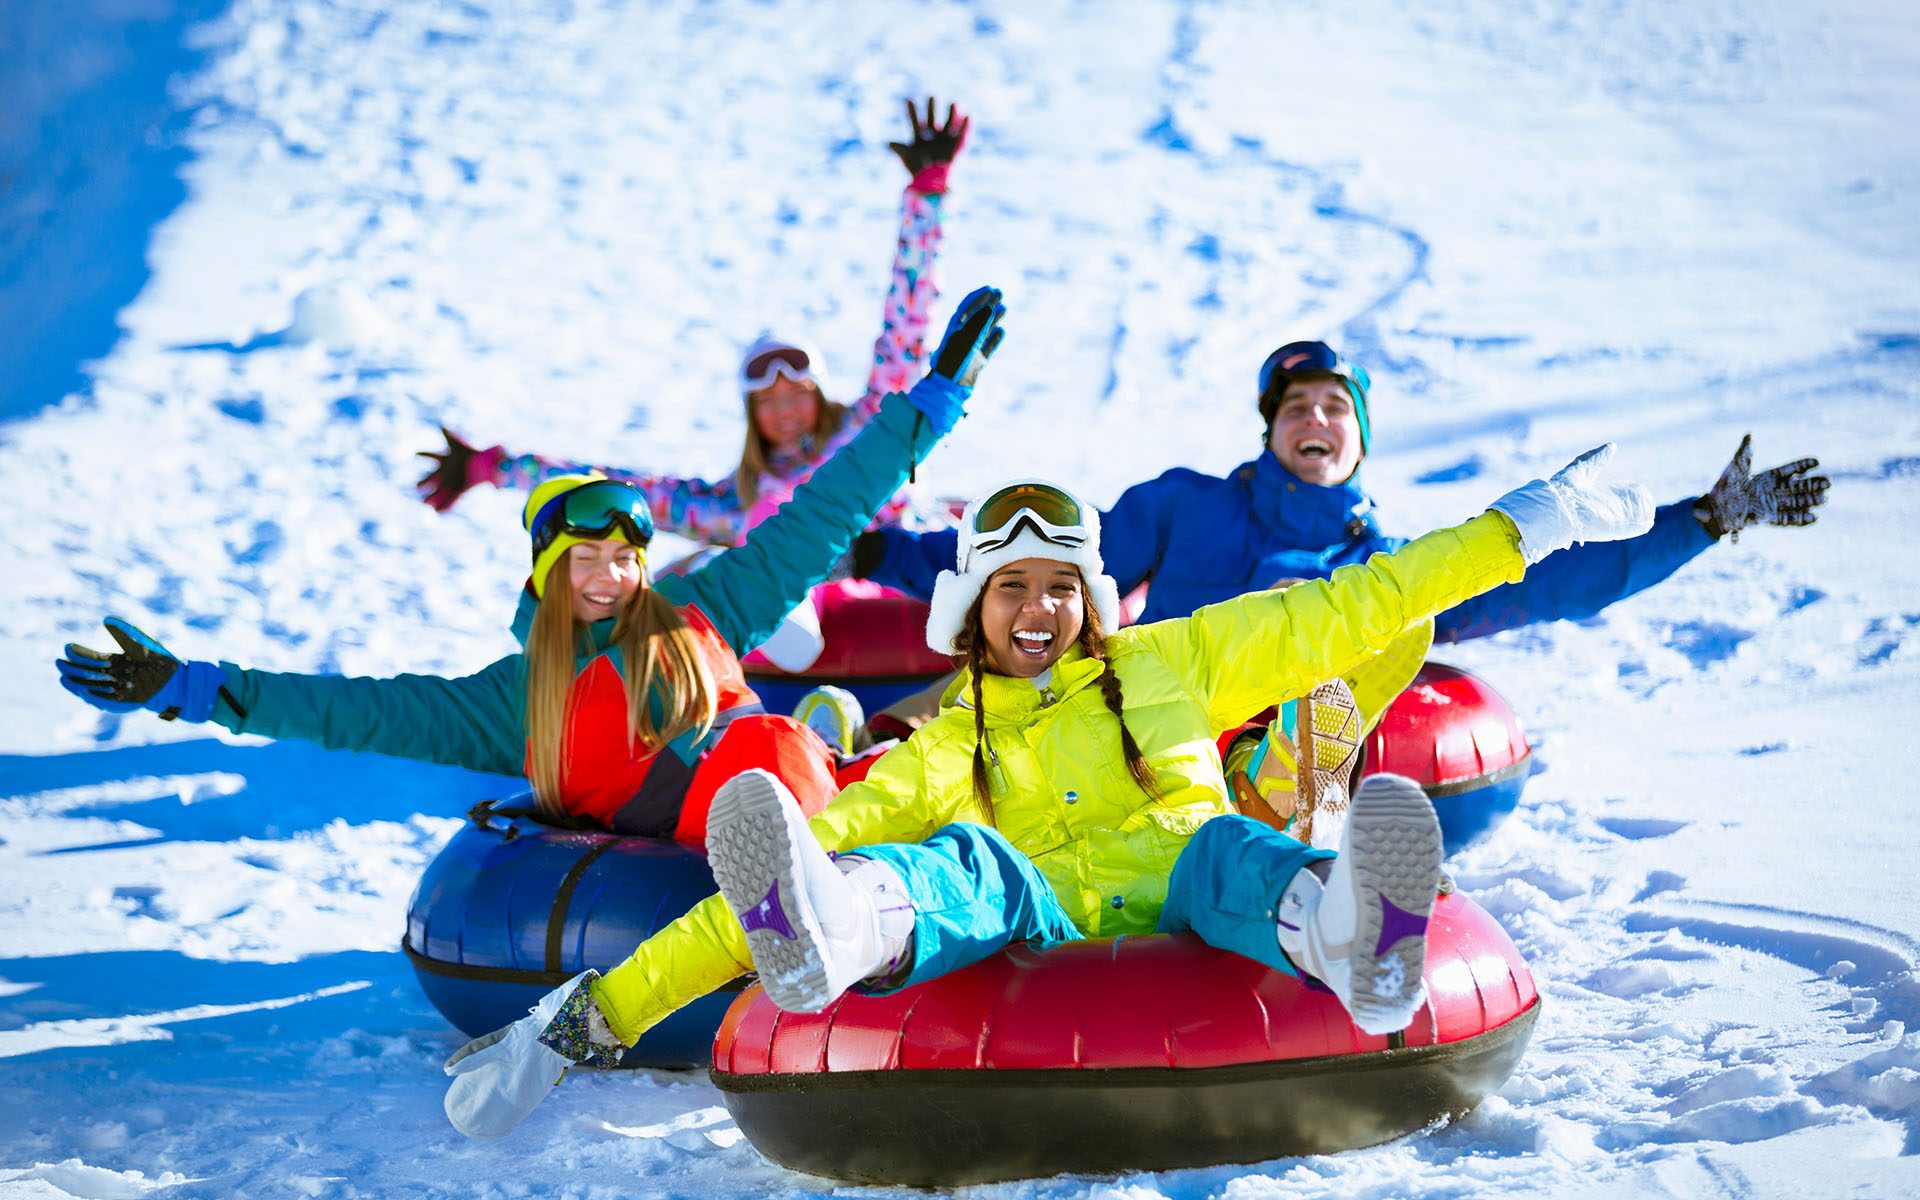 Winter Staycation - Group of People Tubing Down a Snowy Hill